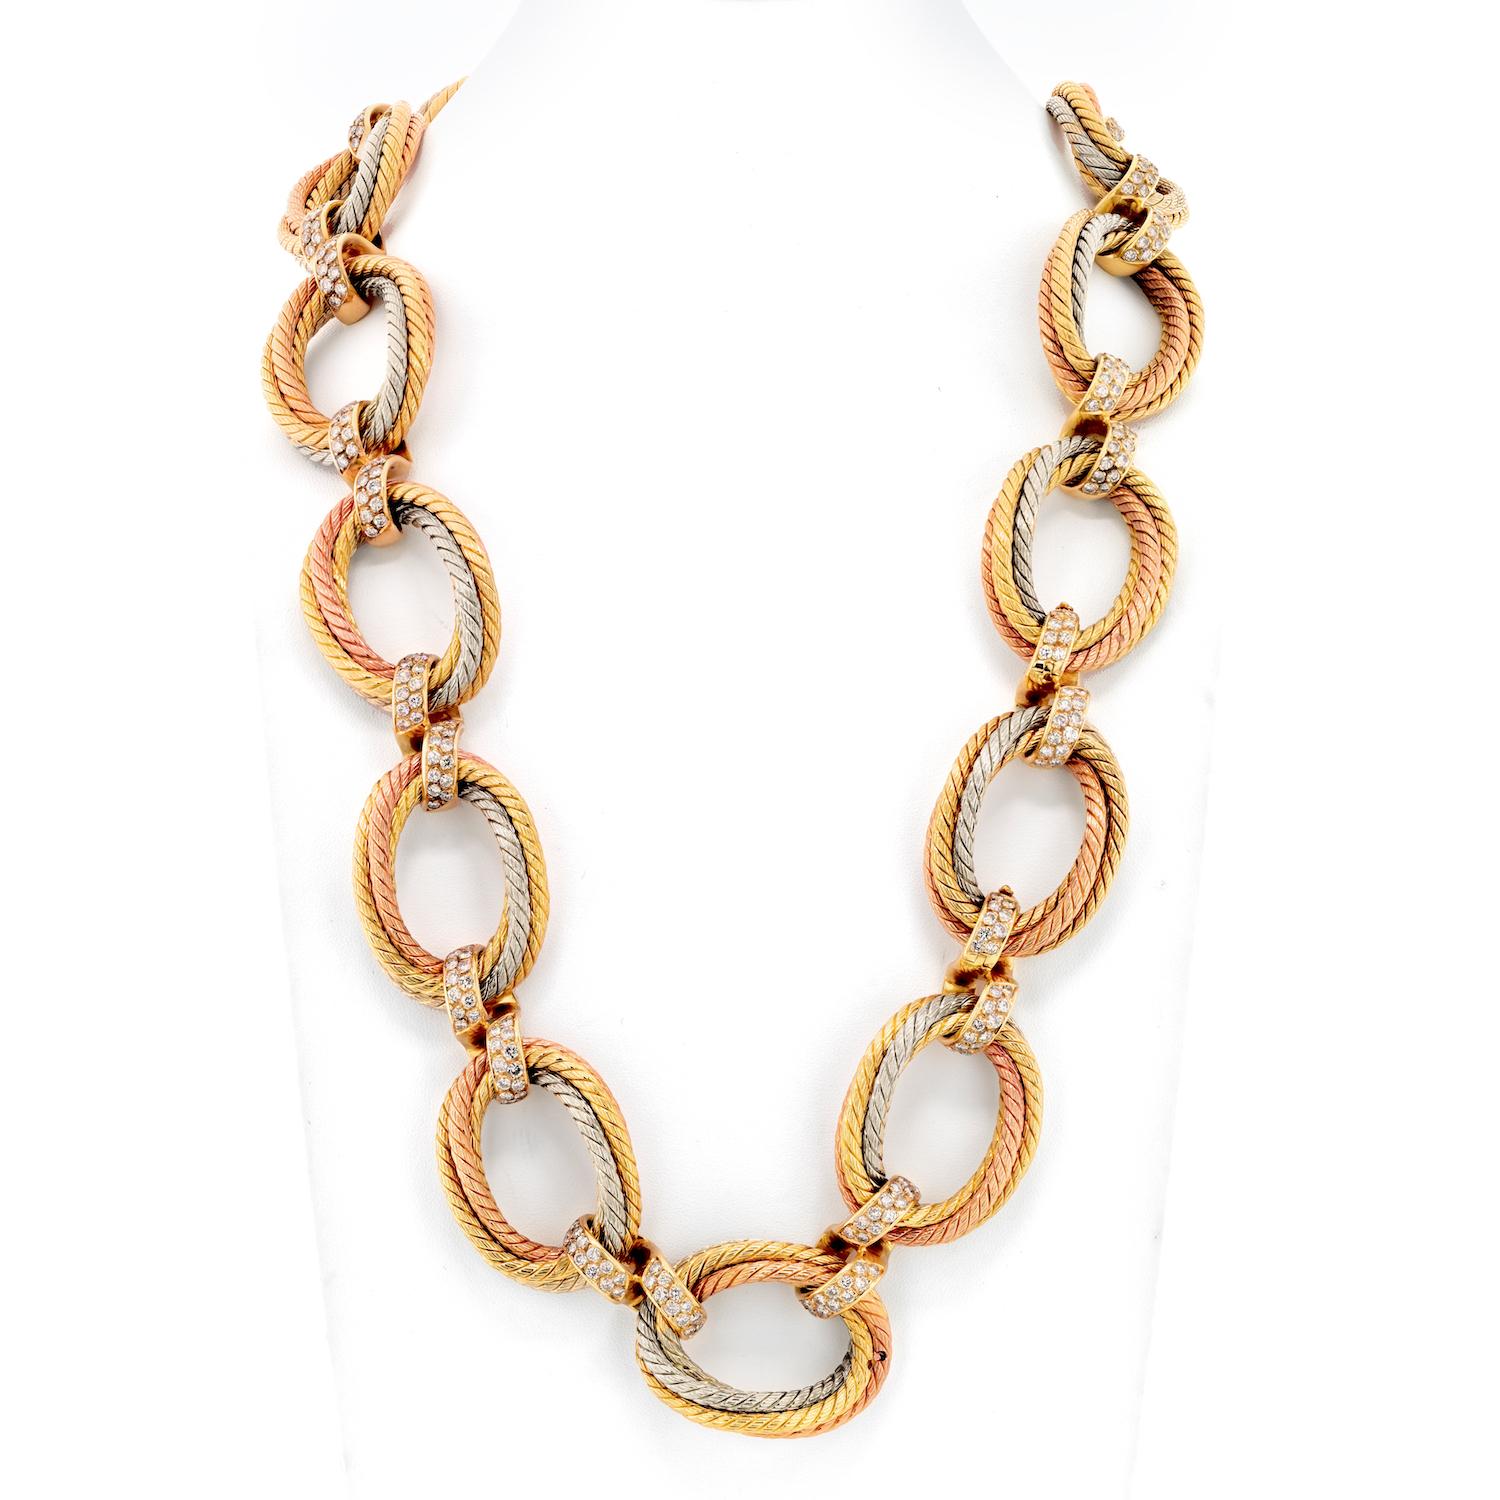 Veronique Cartier 1970s necklace in 18K Tri Color gold with large oval twist rope links all throughout. Each section is connected with diamond-encrusted links. 

This is a very special estate chain necklace by Veronique Cartier, the granddaughter of